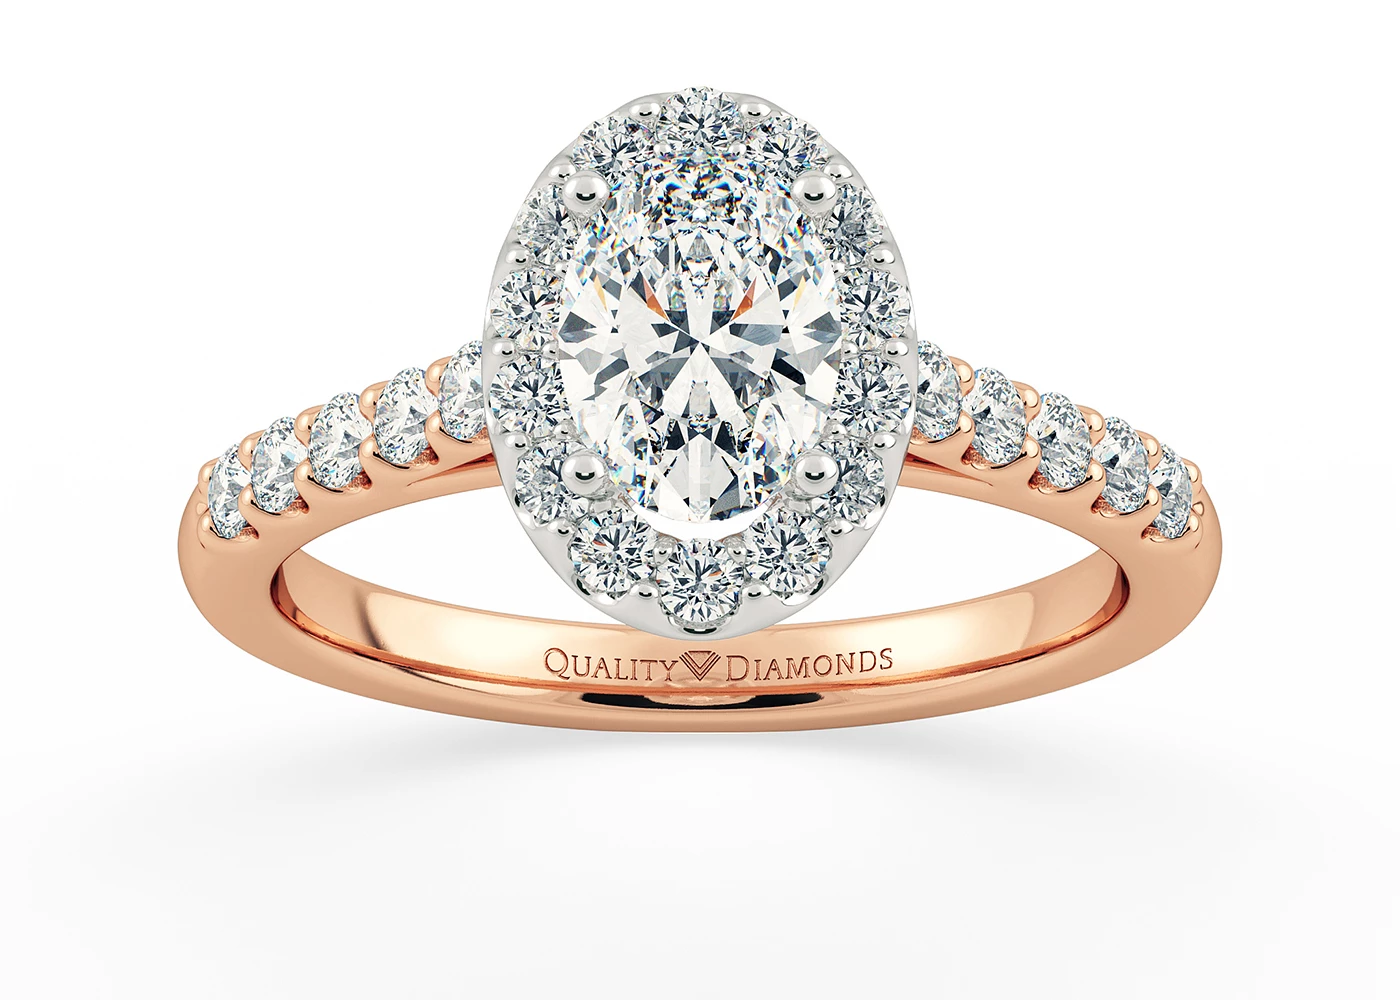 One Carat Oval Halo Diamond Ring in 18K Rose Gold